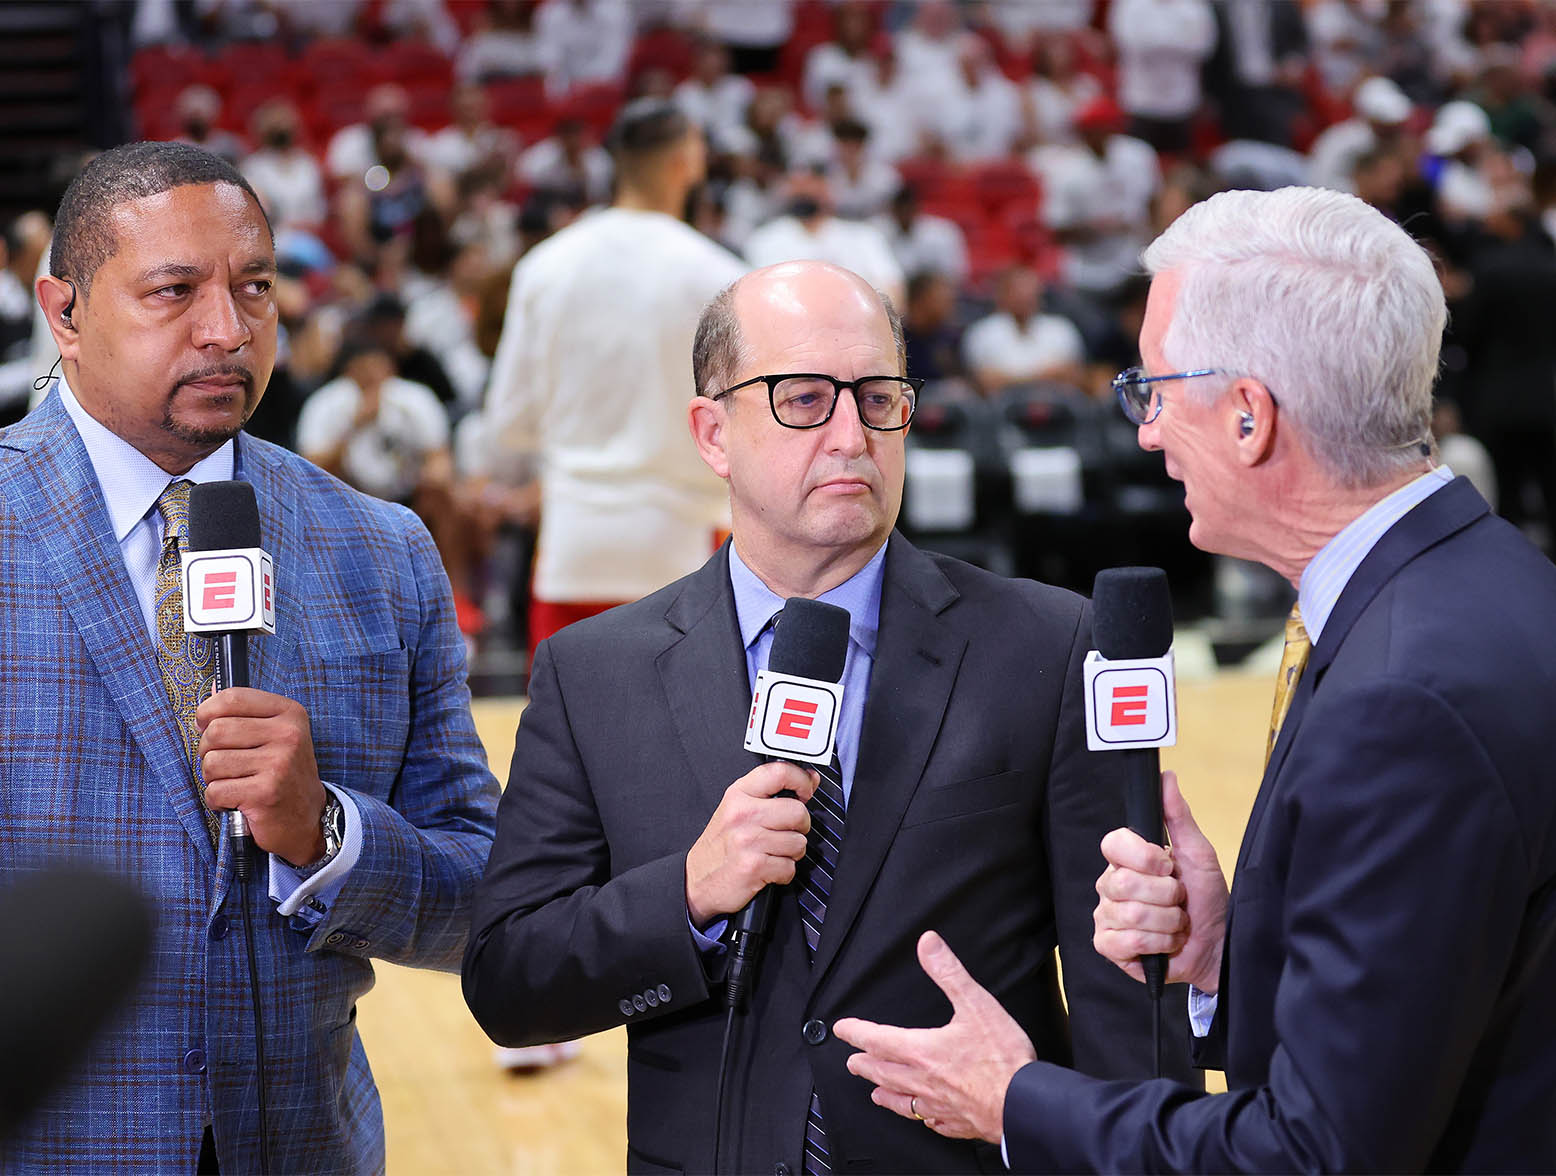 MIAMI, FLORIDA - MAY 19: ESPN Analysts, Mark Jackson, Jeff Van Gundy, and Mike Breen look on prior to Game Two of the 2022 NBA Playoffs Eastern Conference Finals between the Miami Heat and the Boston Celtics at FTX Arena on May 19, 2022 in Miami, Florida. NOTE TO USER: User expressly acknowledges and agrees that, by downloading and or using this photograph, User is consenting to the terms and conditions of the Getty Images License Agreement. (Photo by Michael Reaves/Getty Images)